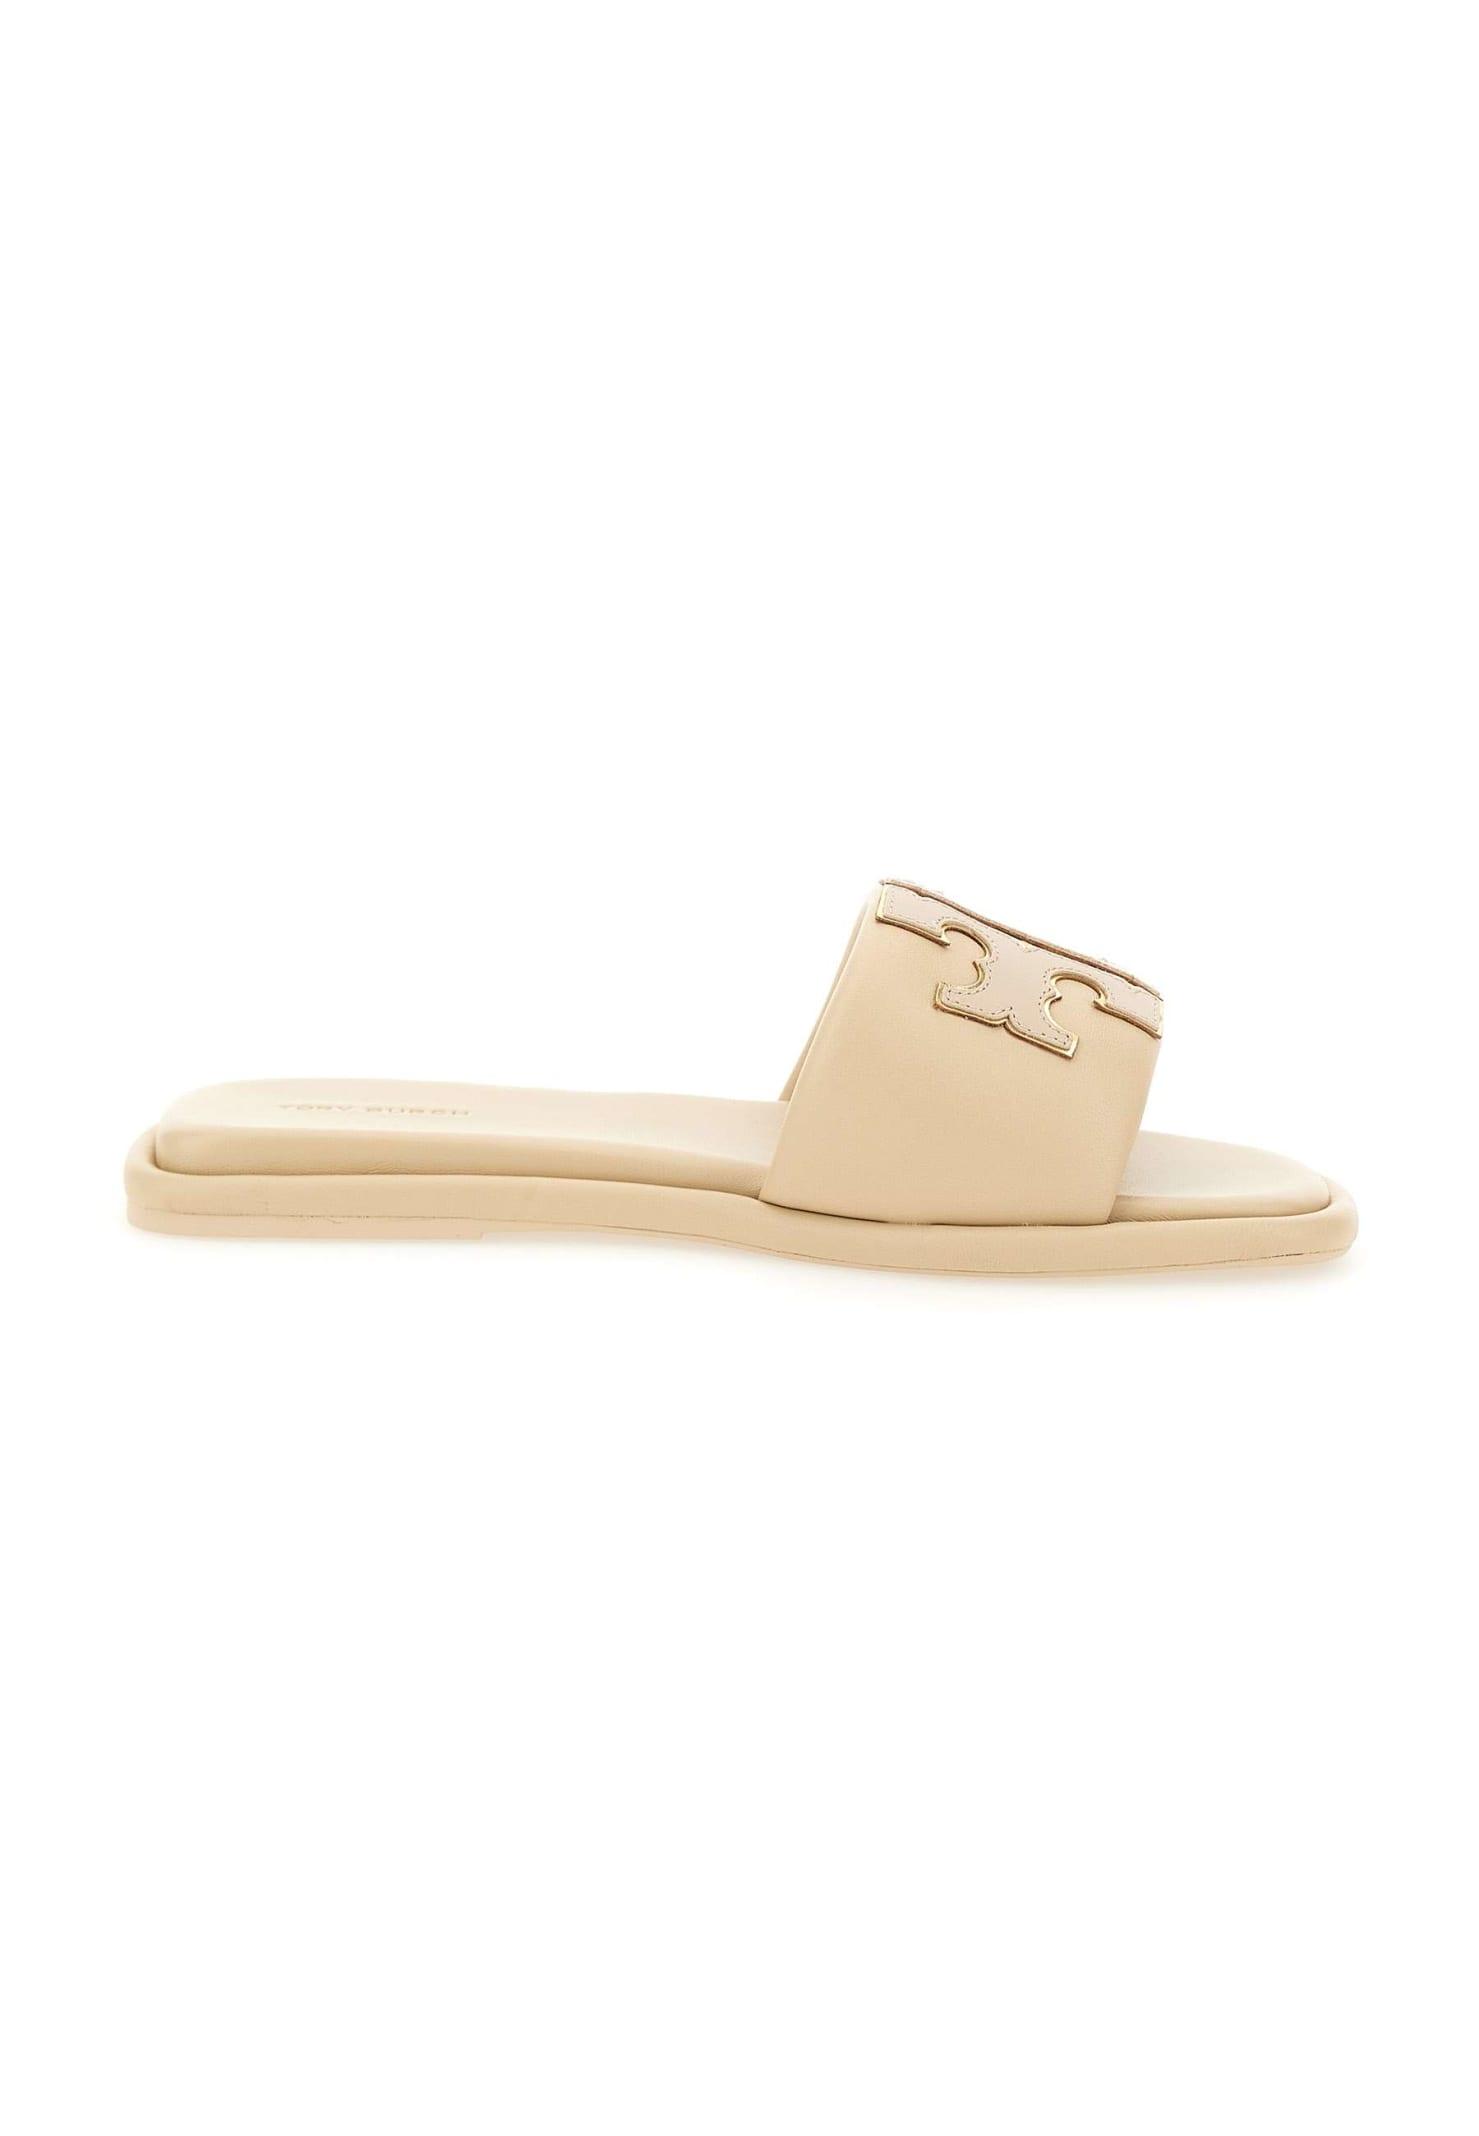 Tory Burch Double T Leather Sandals in White | Lyst